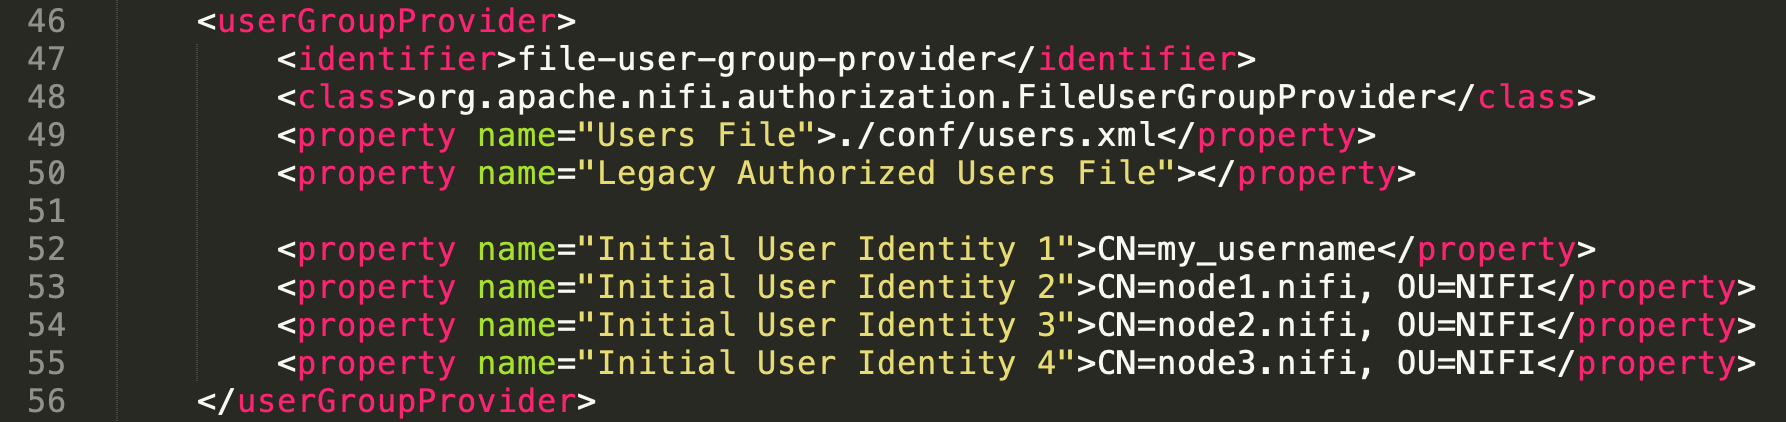 authorizers.xml with Initial User Identities